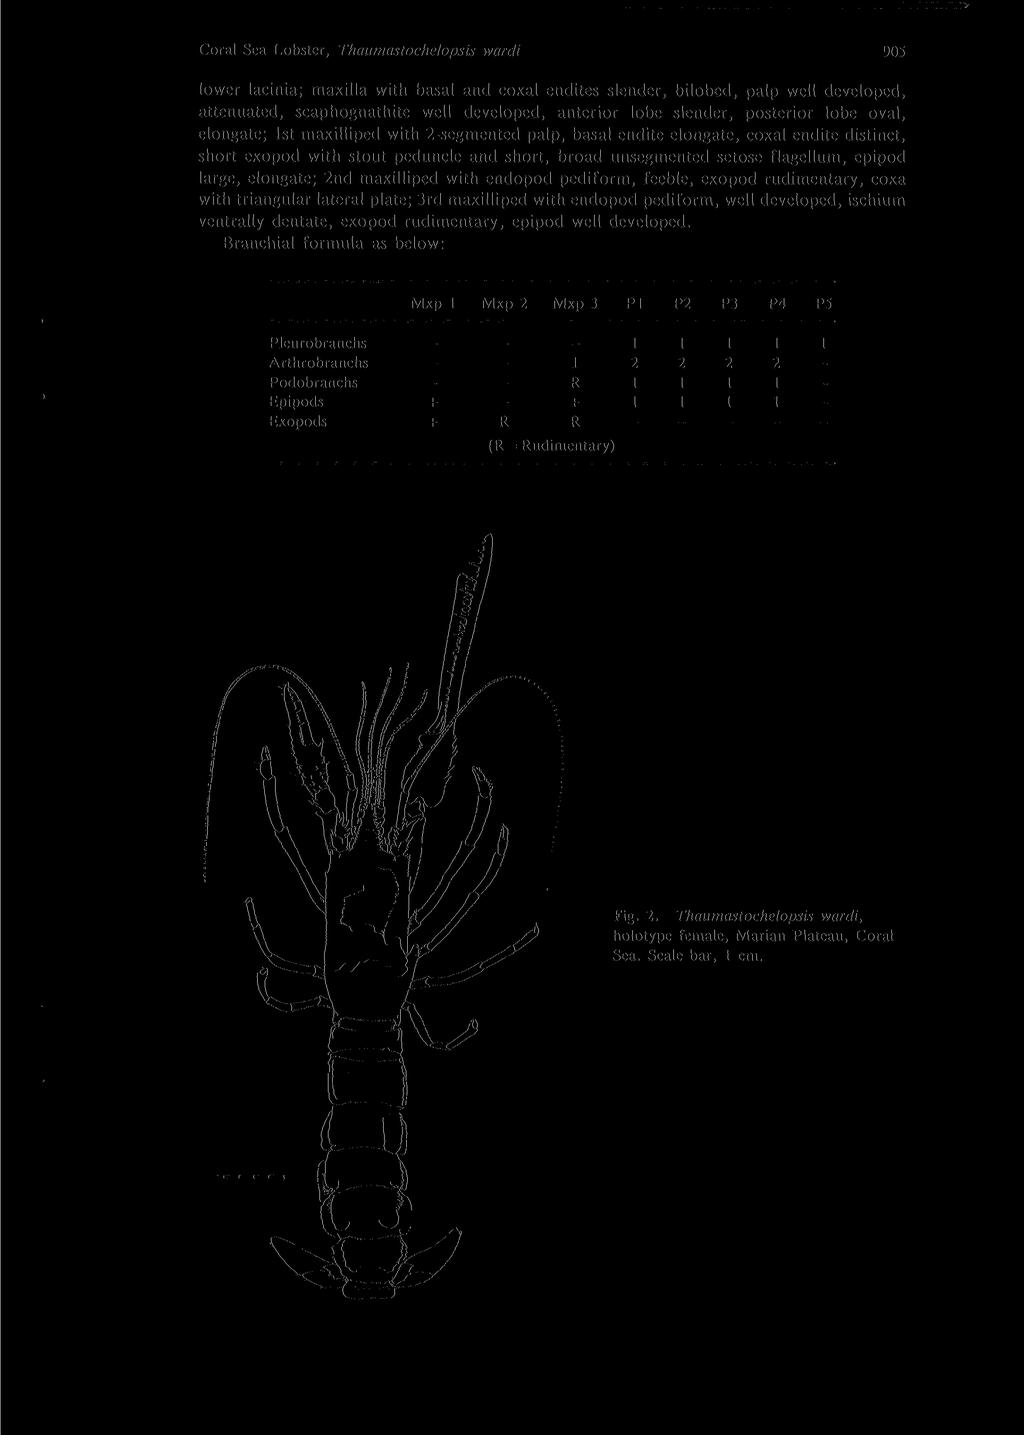 Coral Sea Lobster, Thaumastochelopsis wardi 905 lower lacinia; maxilla with basal and coxal endites slender, bilobed, palp well developed, attenuated, scaphognathite well developed, anterior lobe